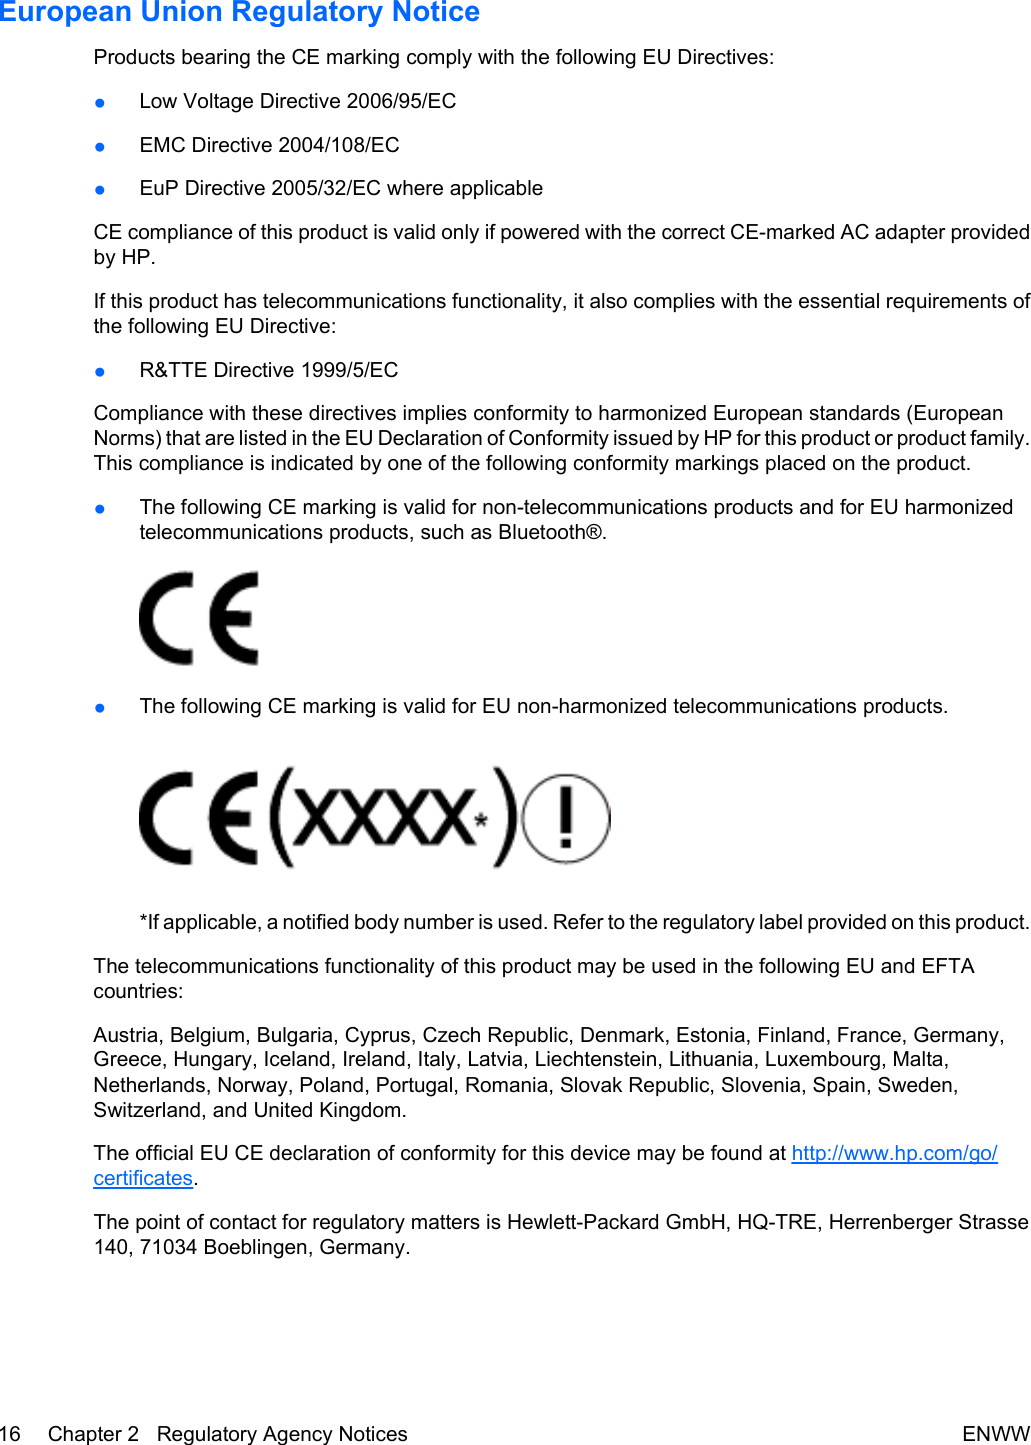 European Union Regulatory NoticeProducts bearing the CE marking comply with the following EU Directives:●Low Voltage Directive 2006/95/EC●EMC Directive 2004/108/EC●EuP Directive 2005/32/EC where applicableCE compliance of this product is valid only if powered with the correct CE-marked AC adapter providedby HP.If this product has telecommunications functionality, it also complies with the essential requirements ofthe following EU Directive:●R&amp;TTE Directive 1999/5/ECCompliance with these directives implies conformity to harmonized European standards (EuropeanNorms) that are listed in the EU Declaration of Conformity issued by HP for this product or product family.This compliance is indicated by one of the following conformity markings placed on the product.●The following CE marking is valid for non-telecommunications products and for EU harmonizedtelecommunications products, such as Bluetooth®.●The following CE marking is valid for EU non-harmonized telecommunications products.*If applicable, a notified body number is used. Refer to the regulatory label provided on this product.The telecommunications functionality of this product may be used in the following EU and EFTAcountries:Austria, Belgium, Bulgaria, Cyprus, Czech Republic, Denmark, Estonia, Finland, France, Germany,Greece, Hungary, Iceland, Ireland, Italy, Latvia, Liechtenstein, Lithuania, Luxembourg, Malta,Netherlands, Norway, Poland, Portugal, Romania, Slovak Republic, Slovenia, Spain, Sweden,Switzerland, and United Kingdom.The official EU CE declaration of conformity for this device may be found at http://www.hp.com/go/certificates.The point of contact for regulatory matters is Hewlett-Packard GmbH, HQ-TRE, Herrenberger Strasse140, 71034 Boeblingen, Germany.16 Chapter 2   Regulatory Agency Notices ENWW